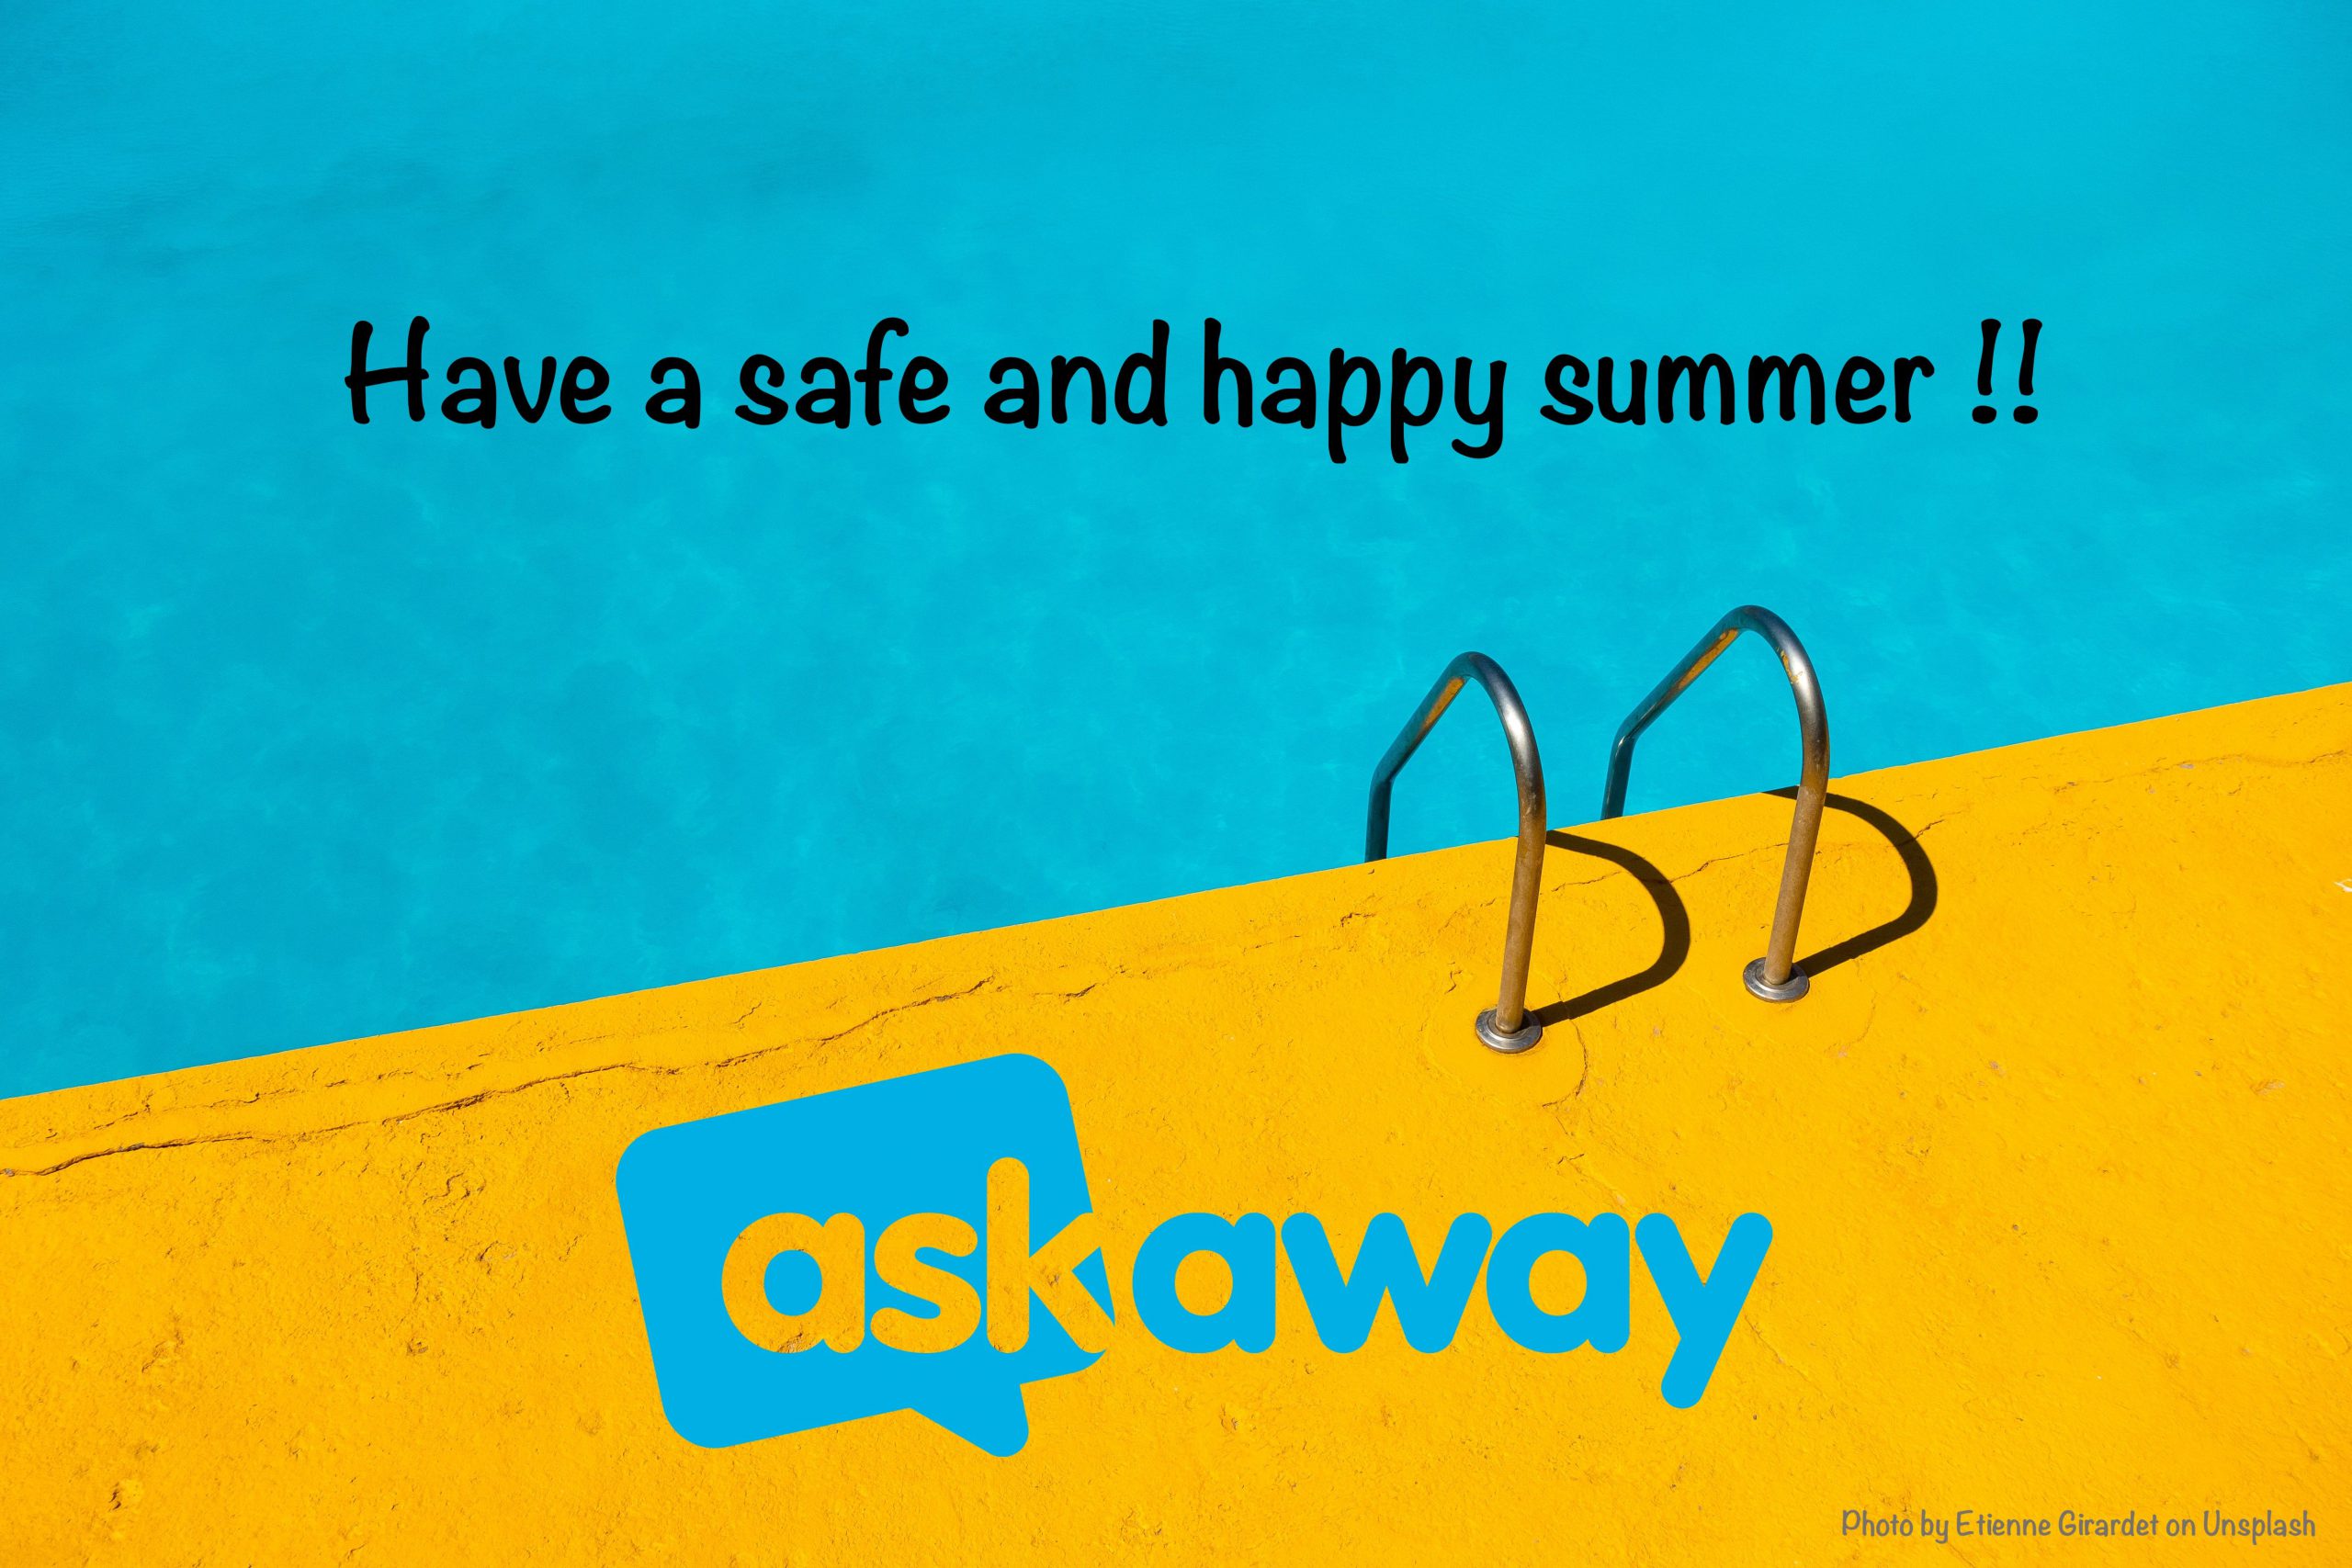 Have a safe and happy summer!!